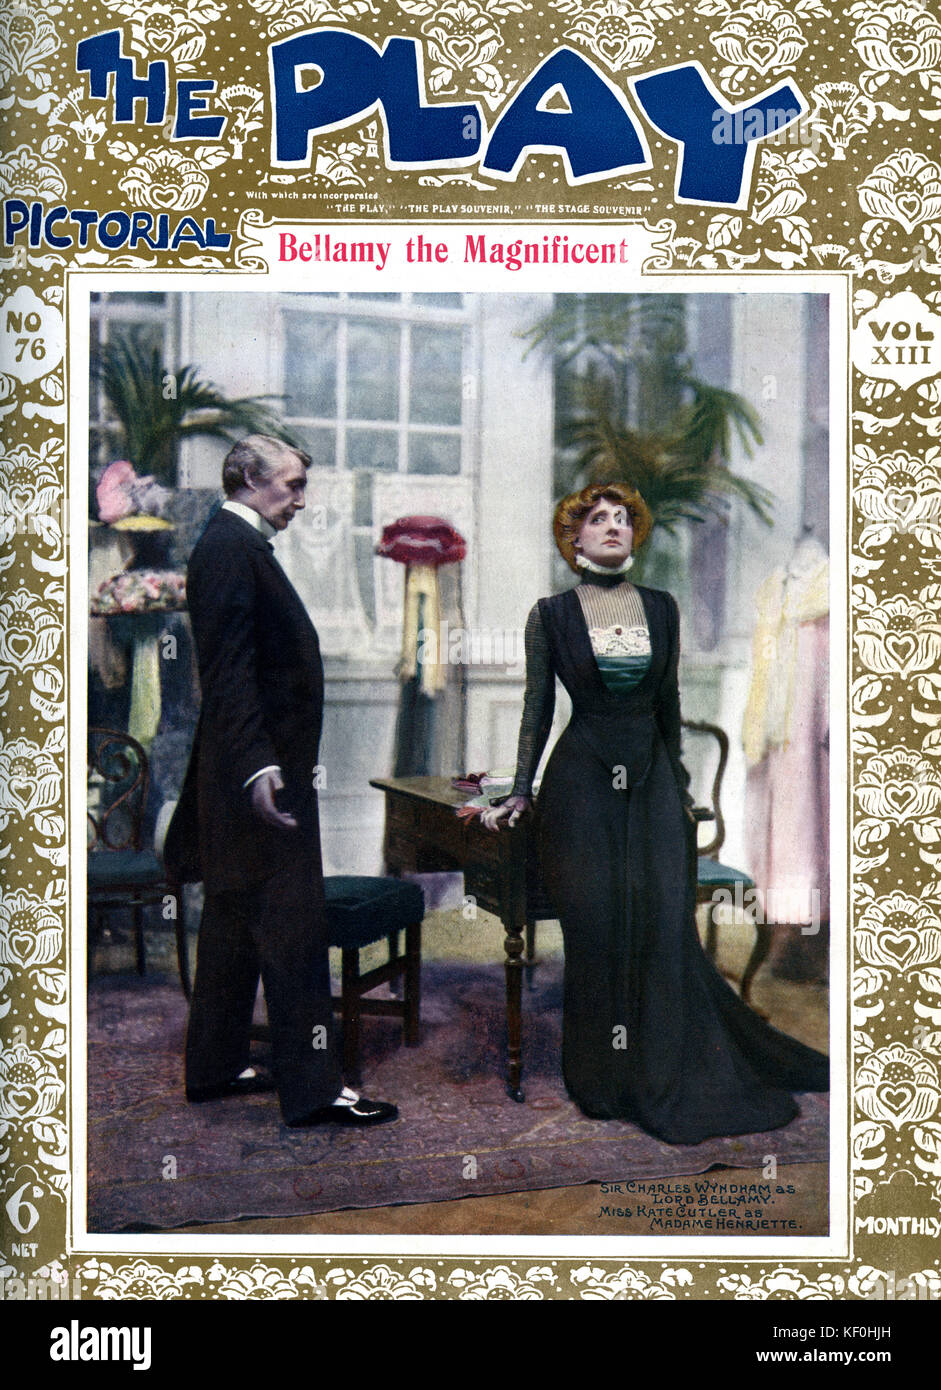 'Bellamy the Magnificent' by Roy Horniman, with Charles Wyndham as Lord Bellamy and Kate Cutler as Madame Henriette. A London production at the New Theatre. Cover of Play Pictorial, 1908. CW, 23 March 1837 – January 12 1919. KC, 14 August 1864 – 14 May 1955. Stock Photo